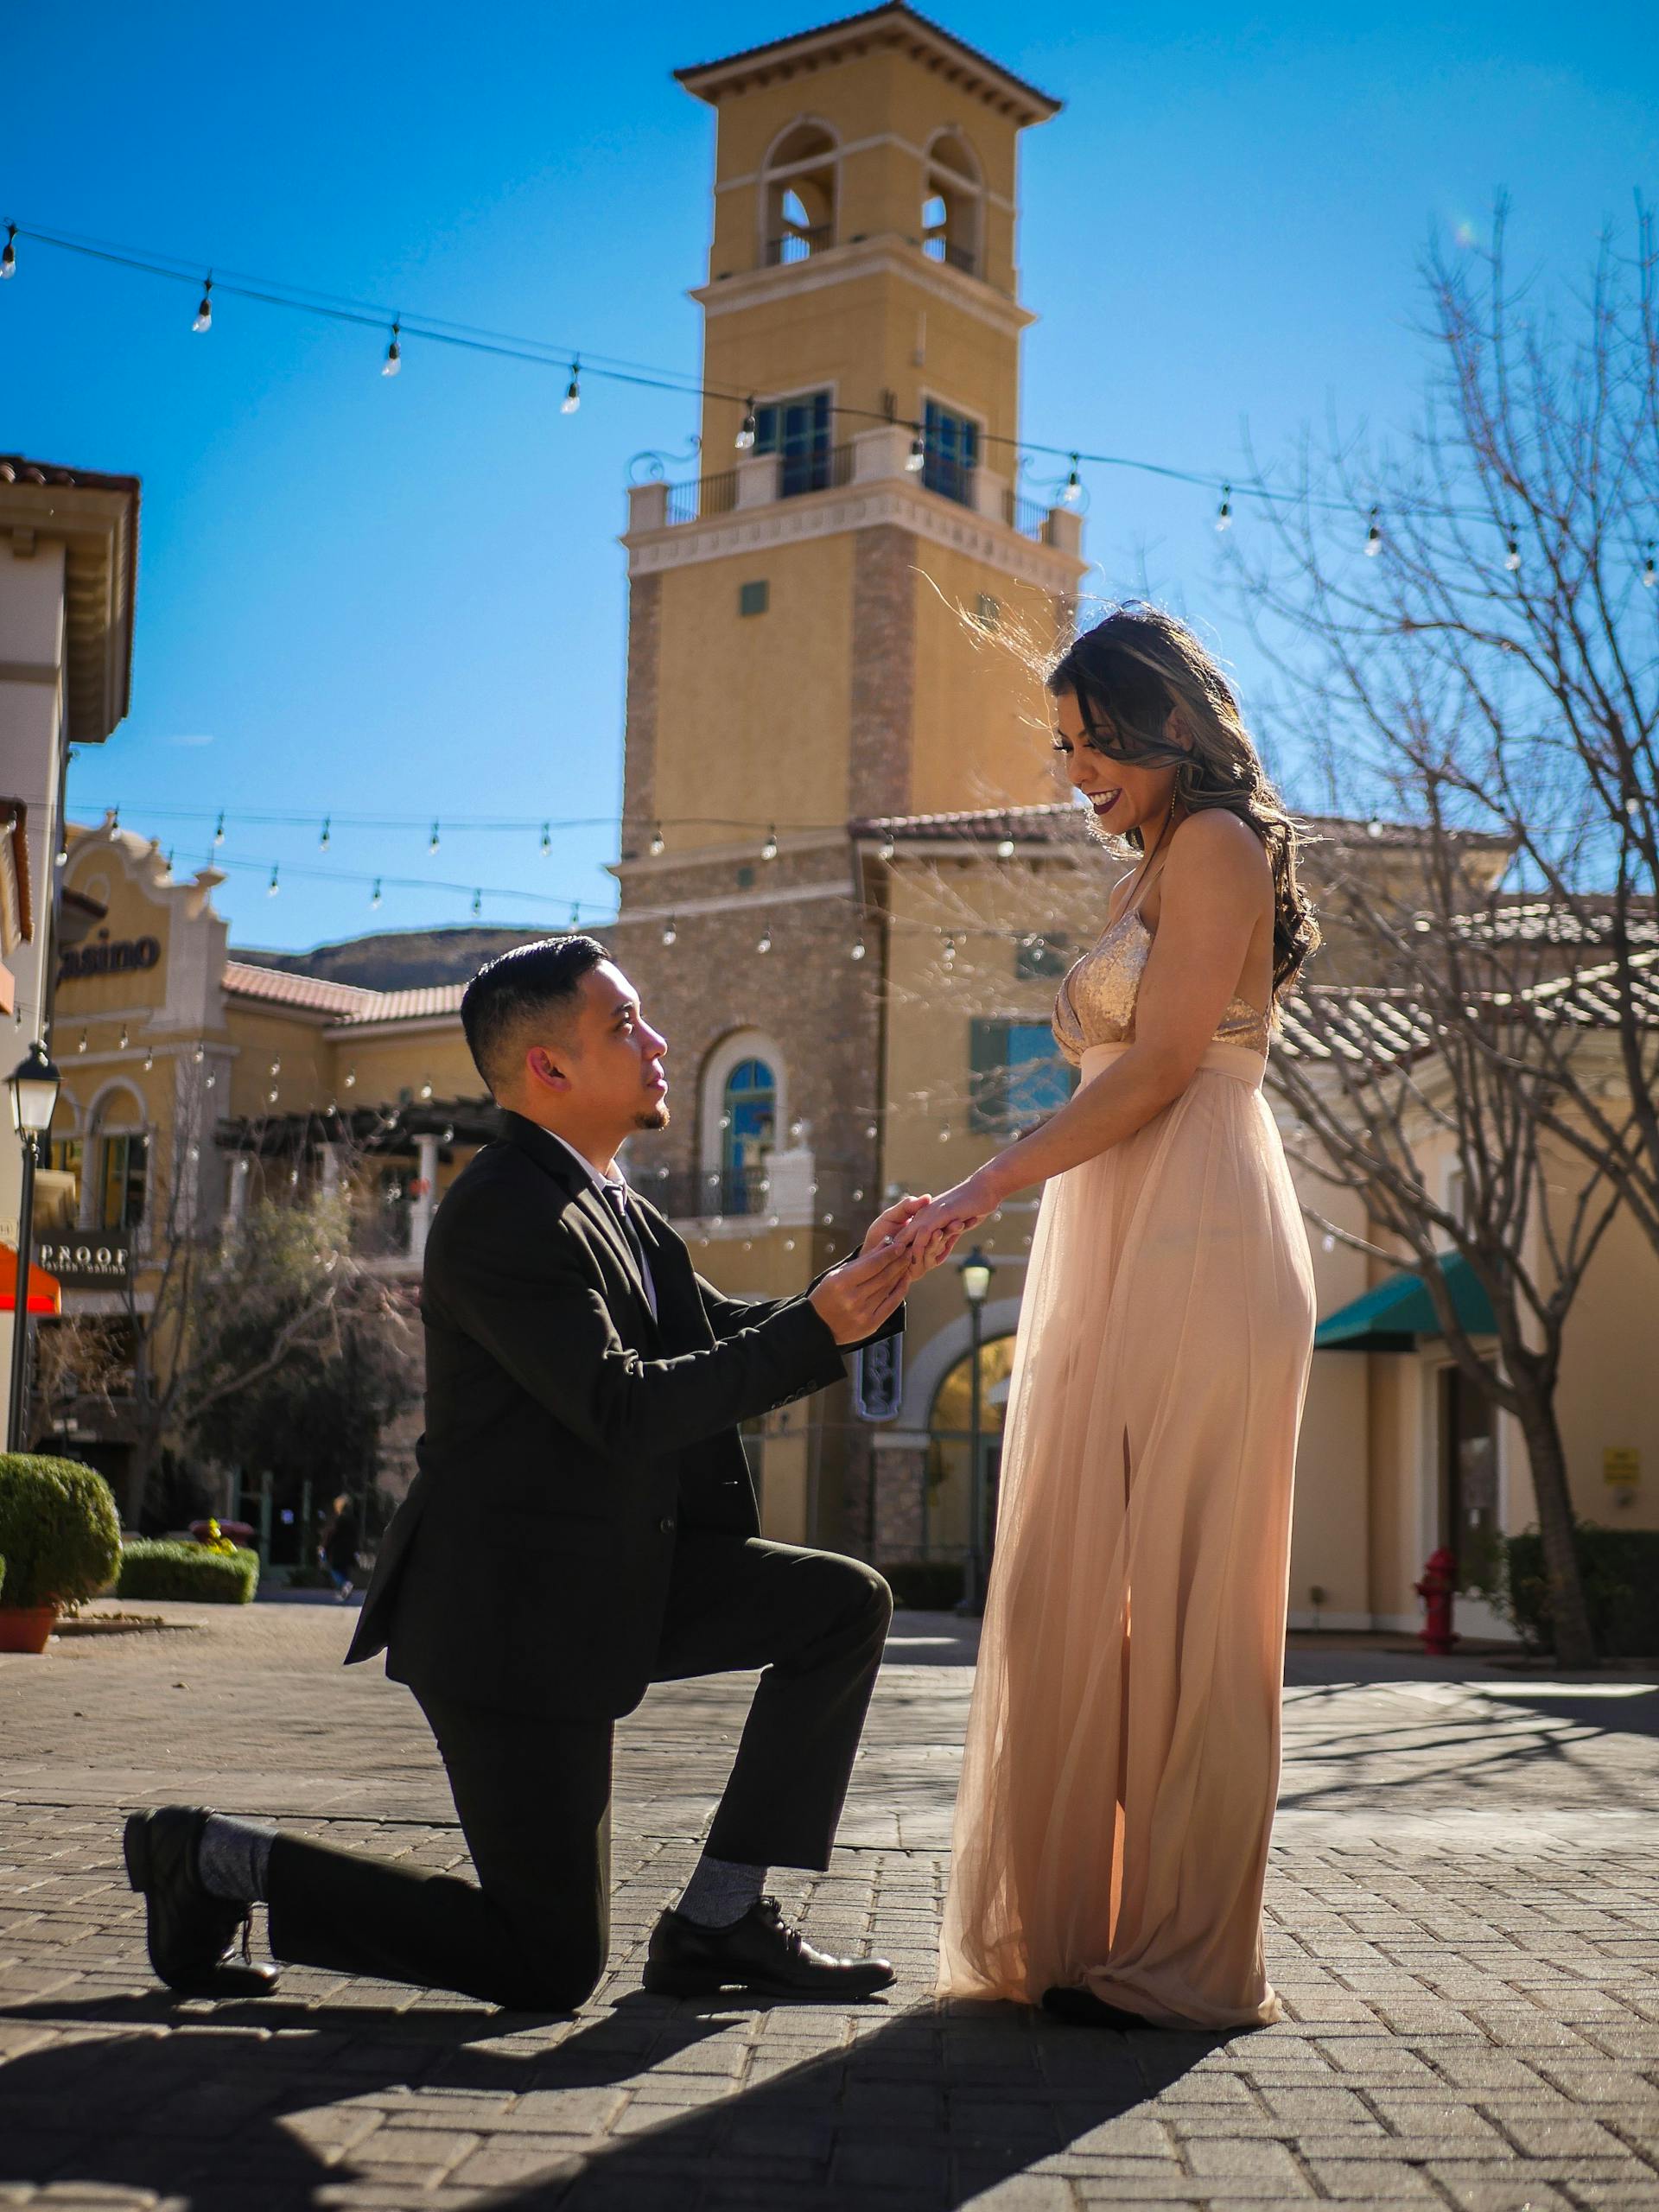 Photo of a proposal | Source: Pexels